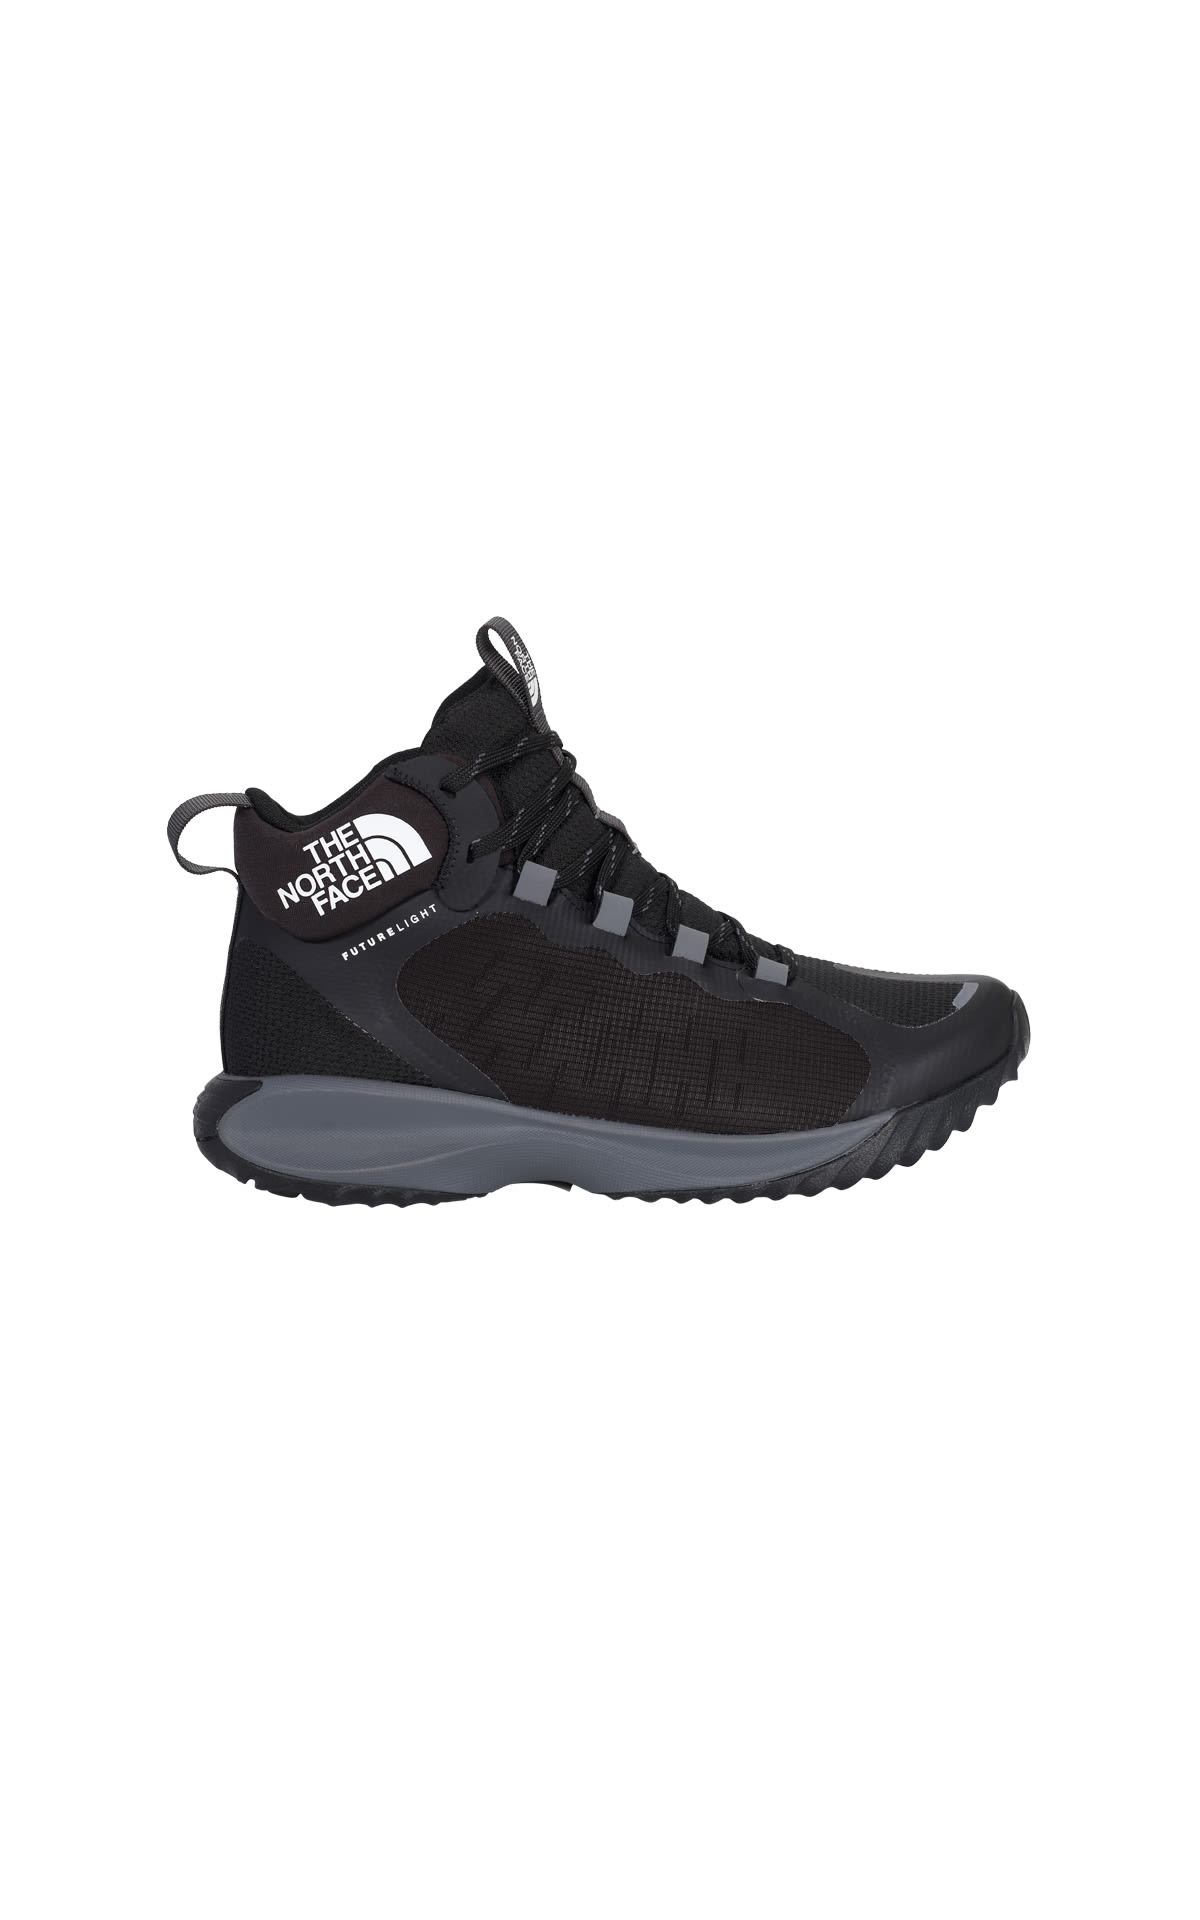 Black hiking boots The North Face